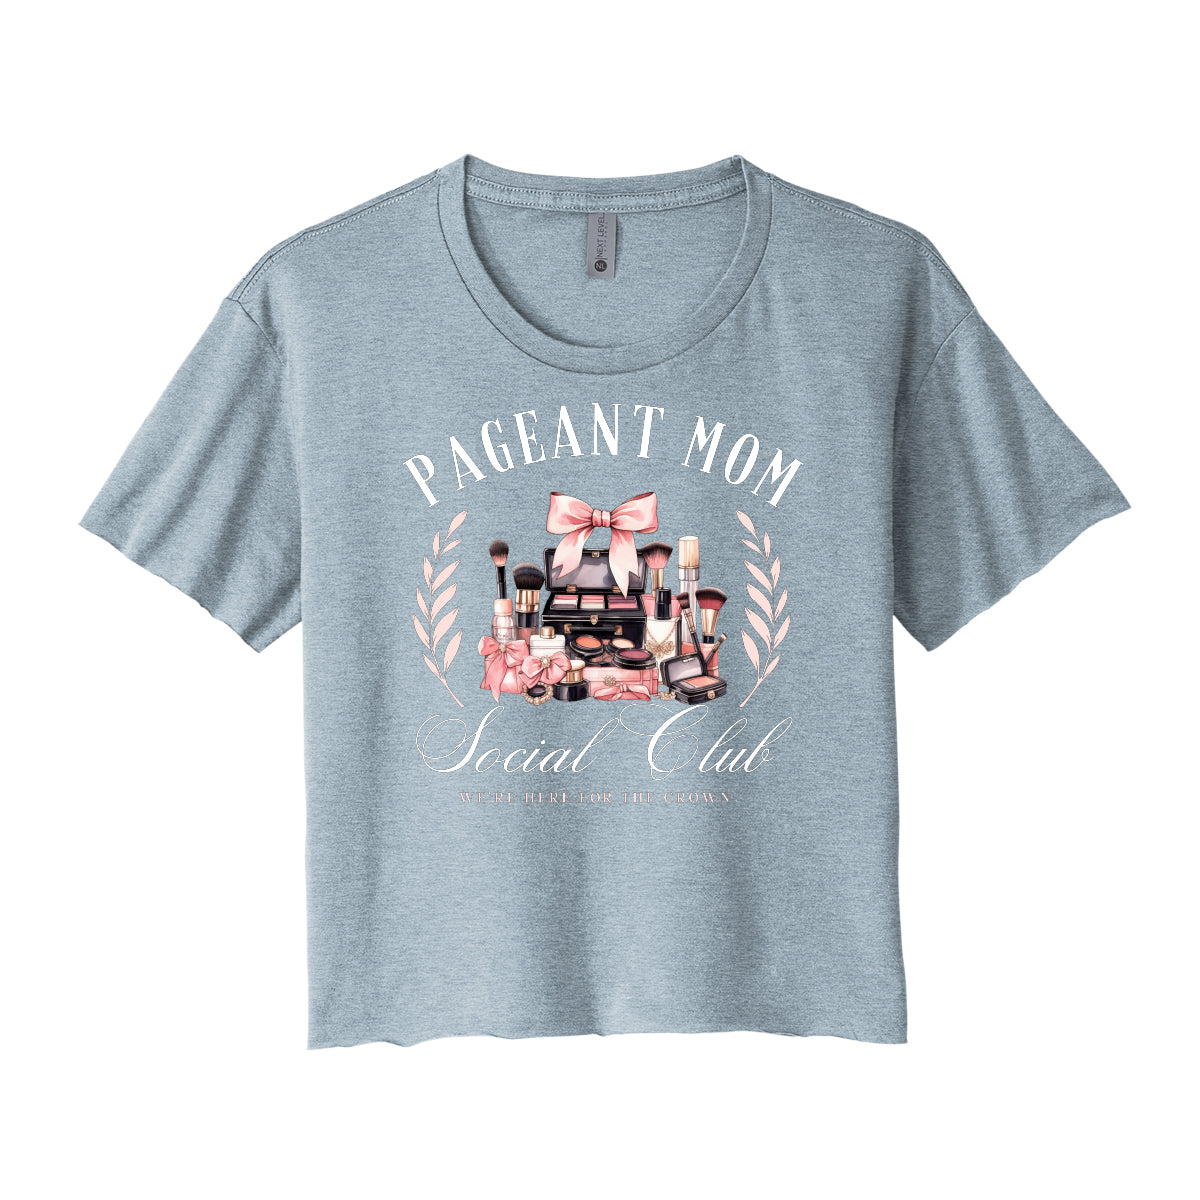 Pageant Mom Social Club Cropped Tee